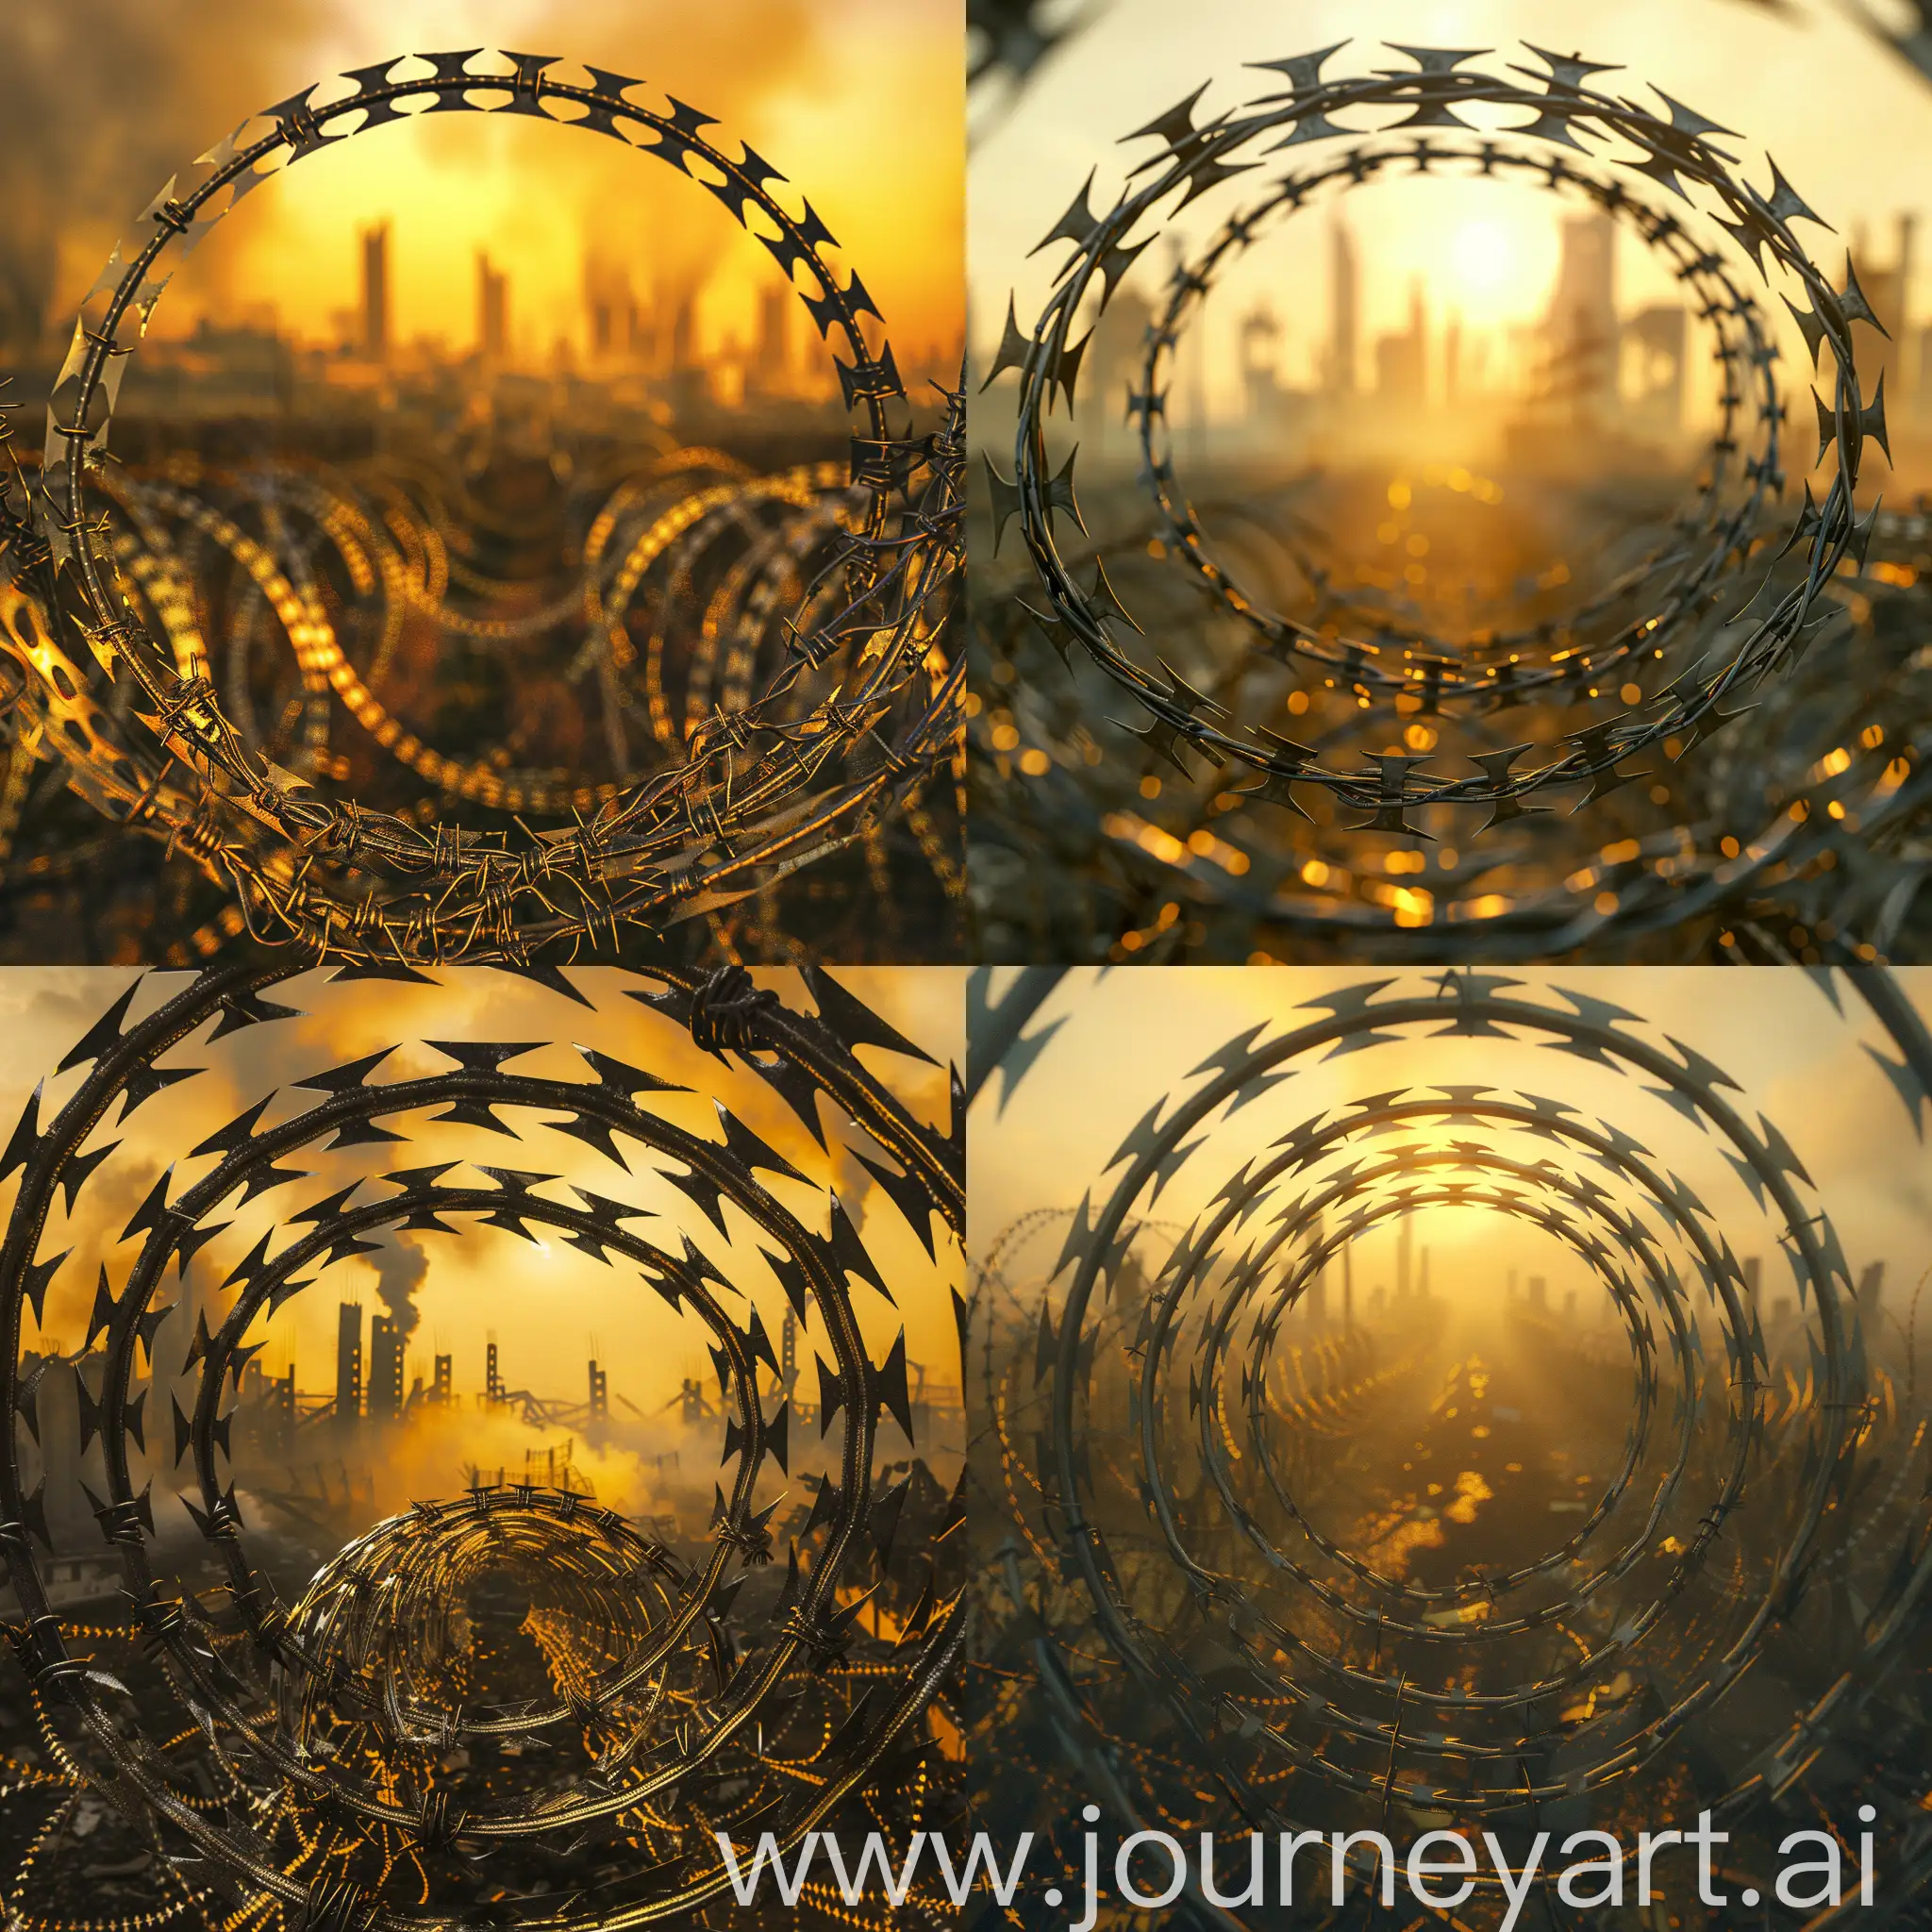 close-up of many razor barbed wire fences forming a circle, in the background a destroyed city at dawn, yellow tones, smoke columns, metallic reflections, see barbed wire fences in a complete circle